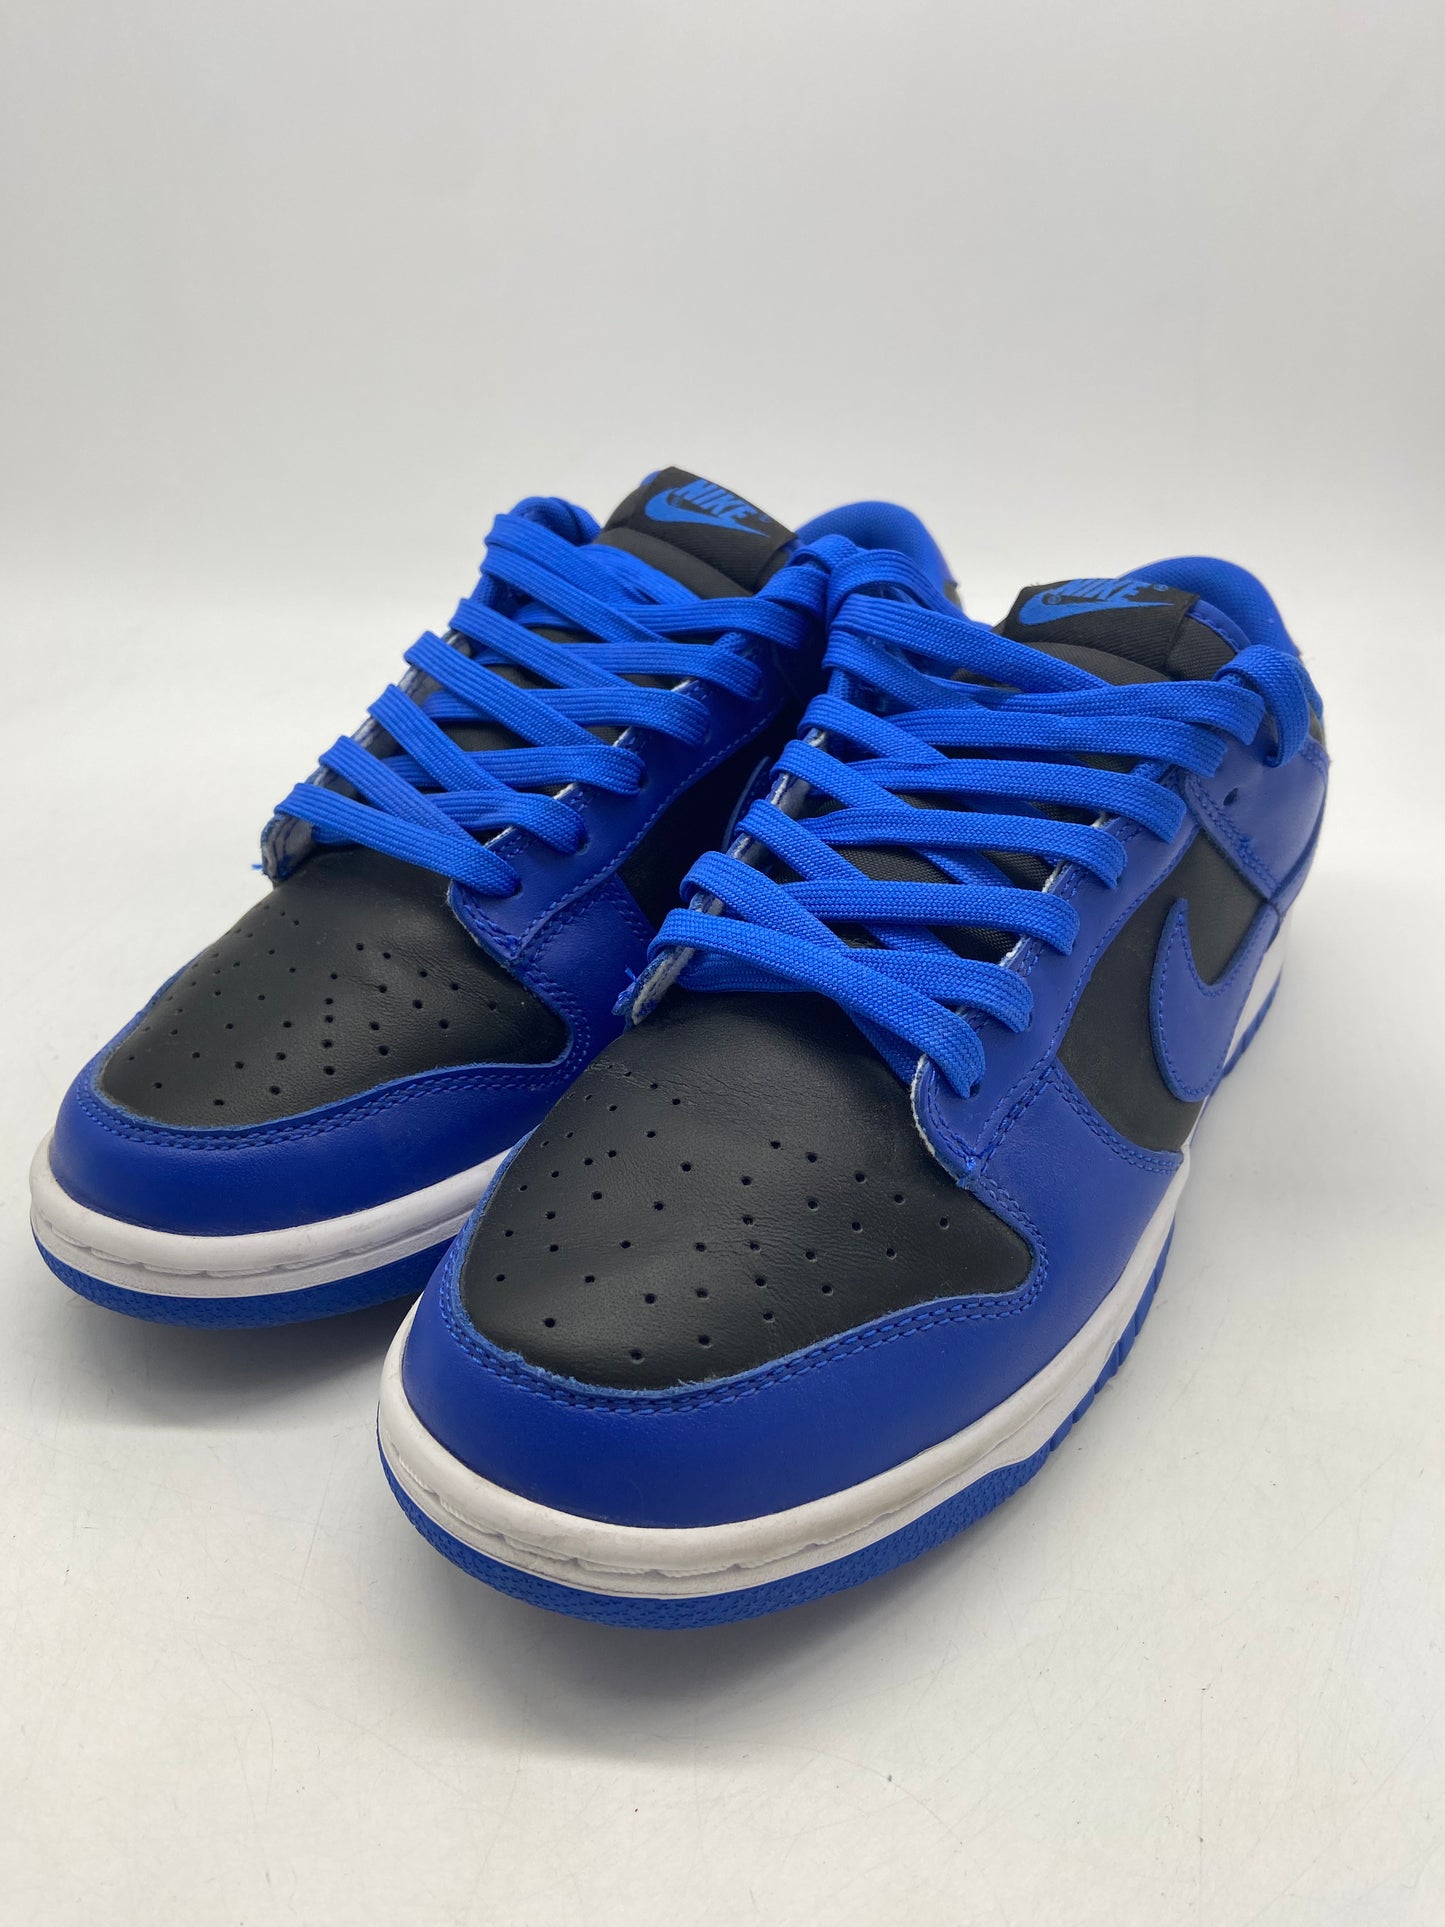 Load image into Gallery viewer, Preowned Nike Dunk Low Retro Black Hyper Cobalt (2021) Sz 8.5M/10W DD1391-001
